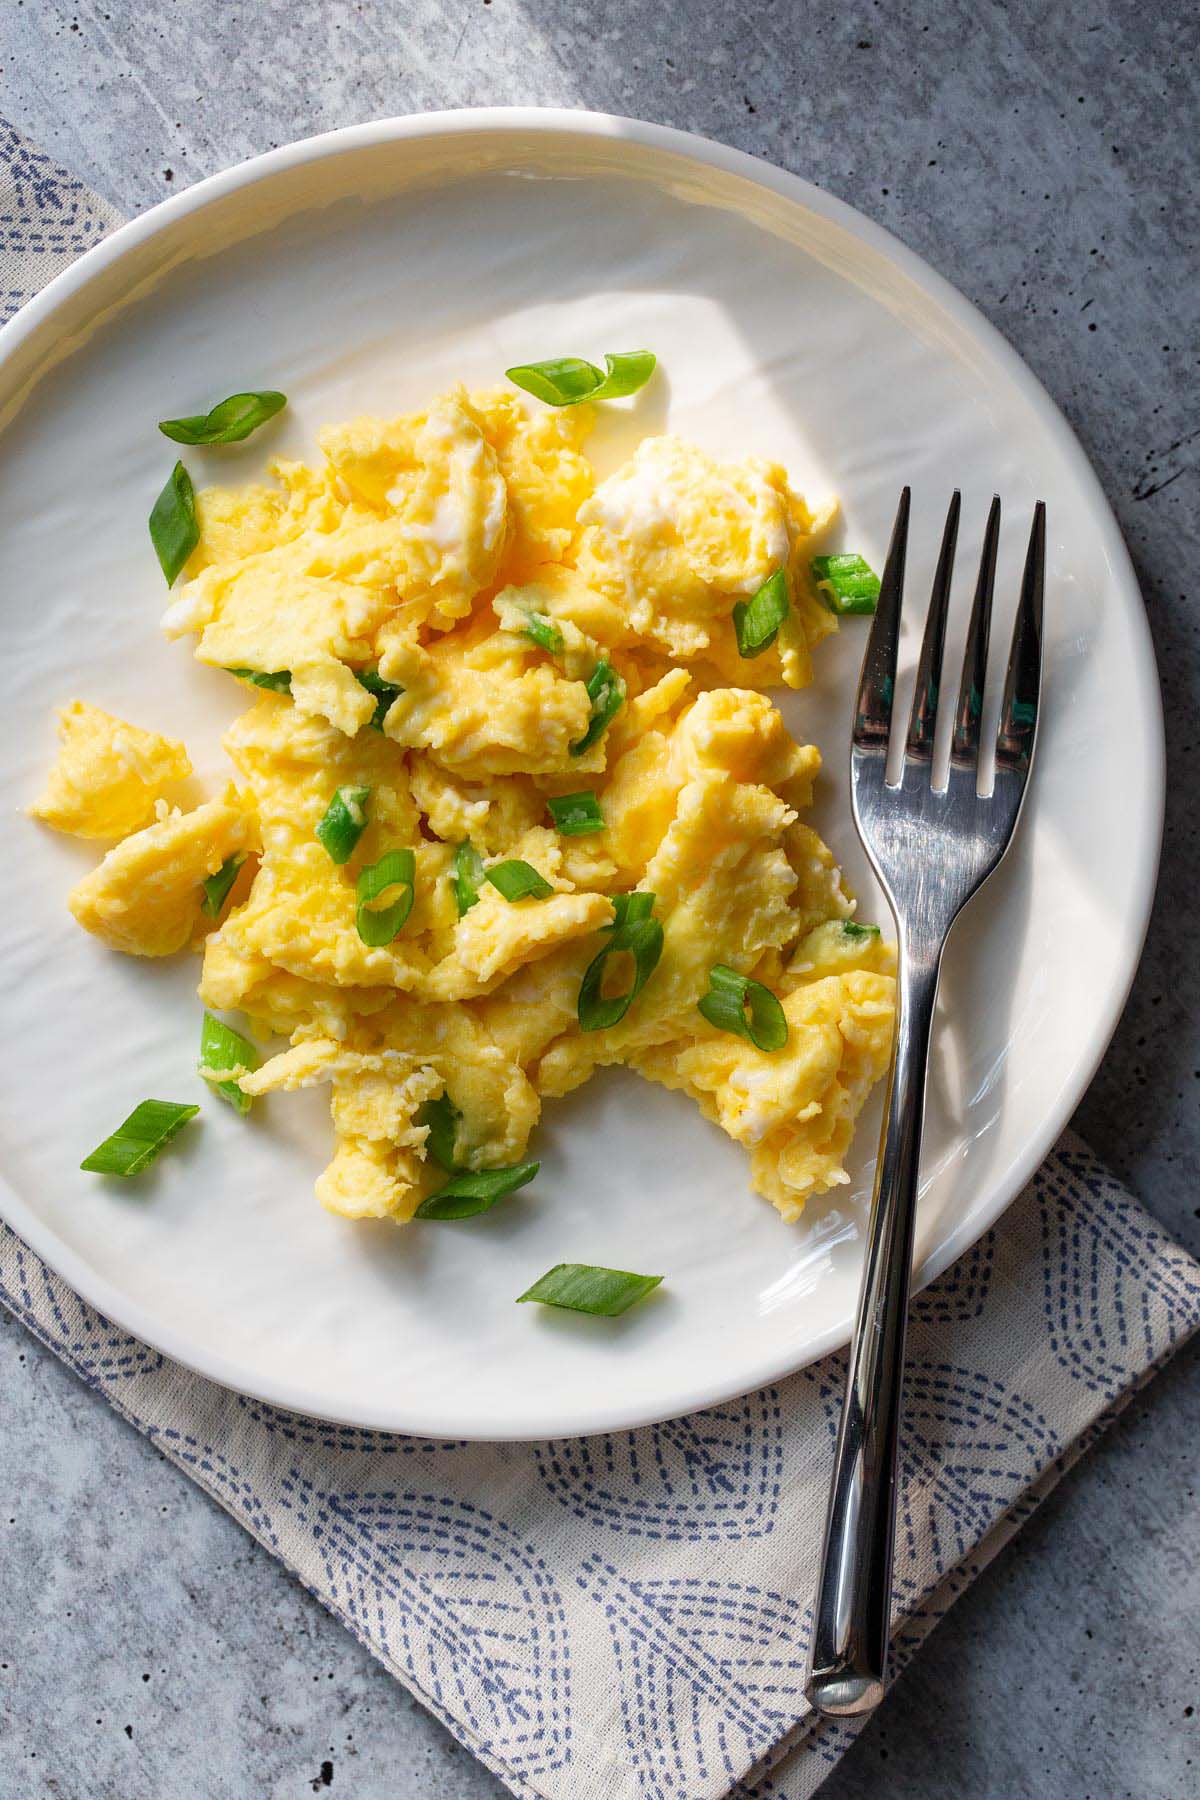 Scrambled eggs with green onions.